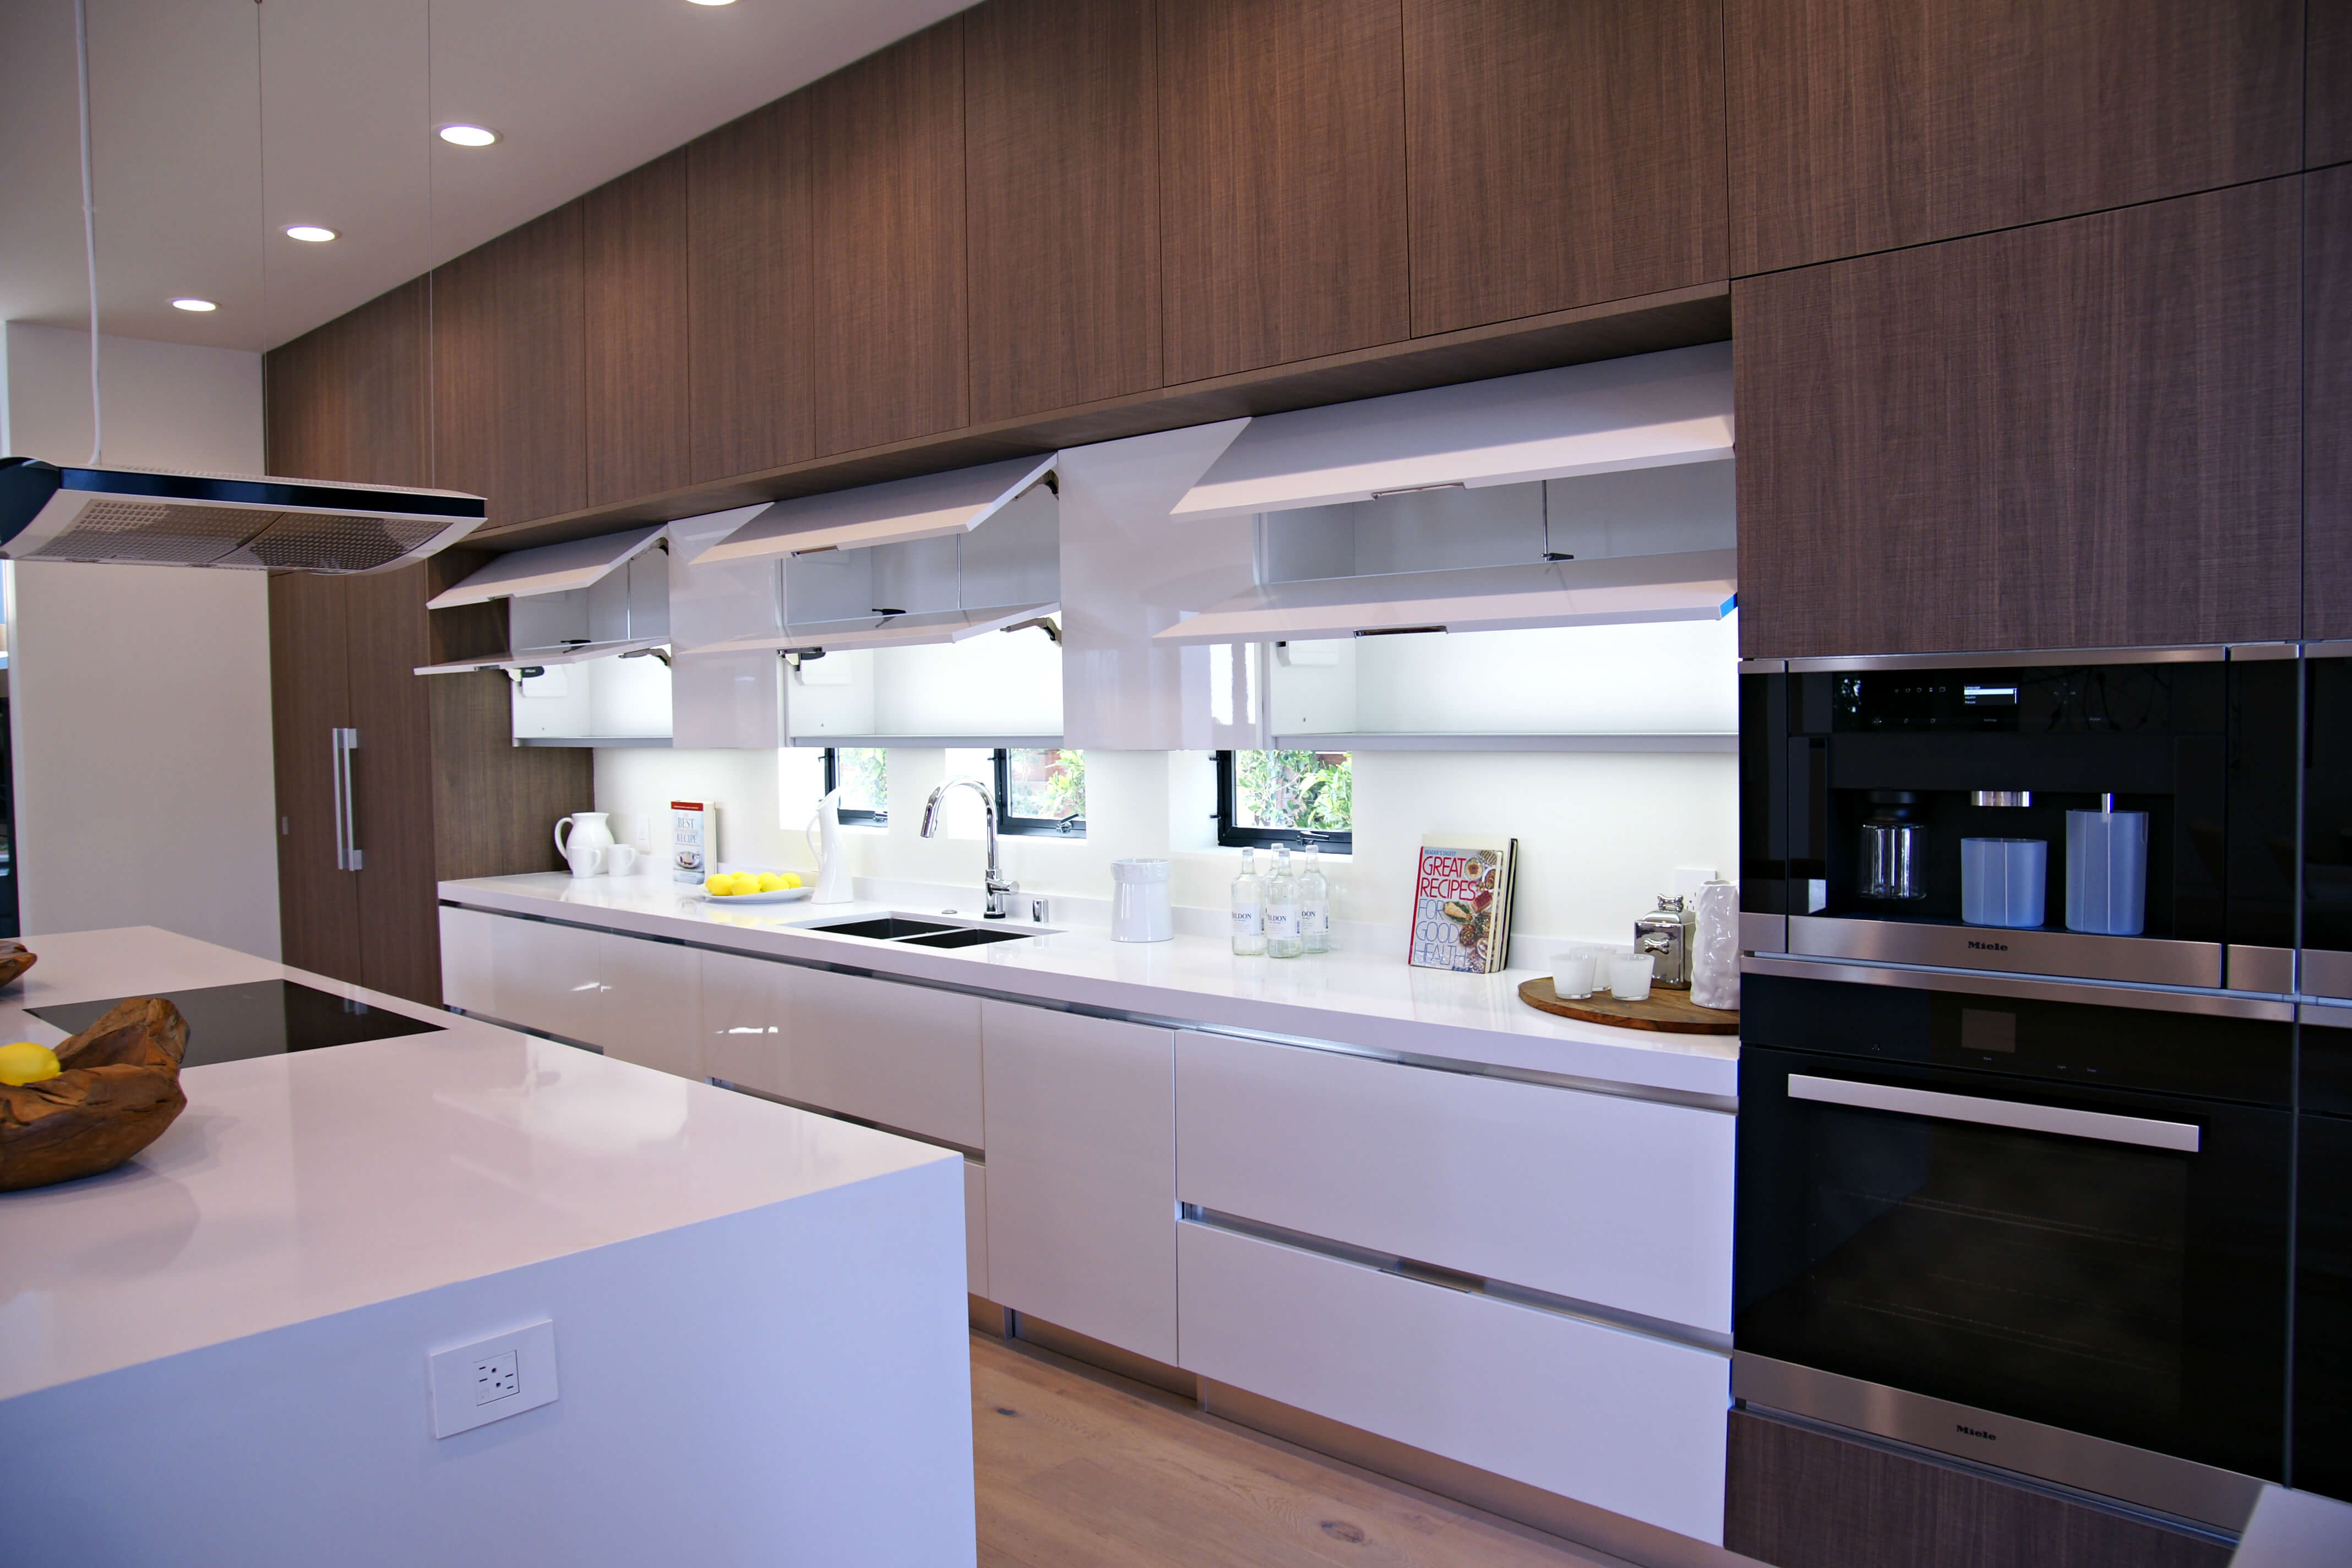 European kitchen cabinets | Euro style cabinetry by design, USA